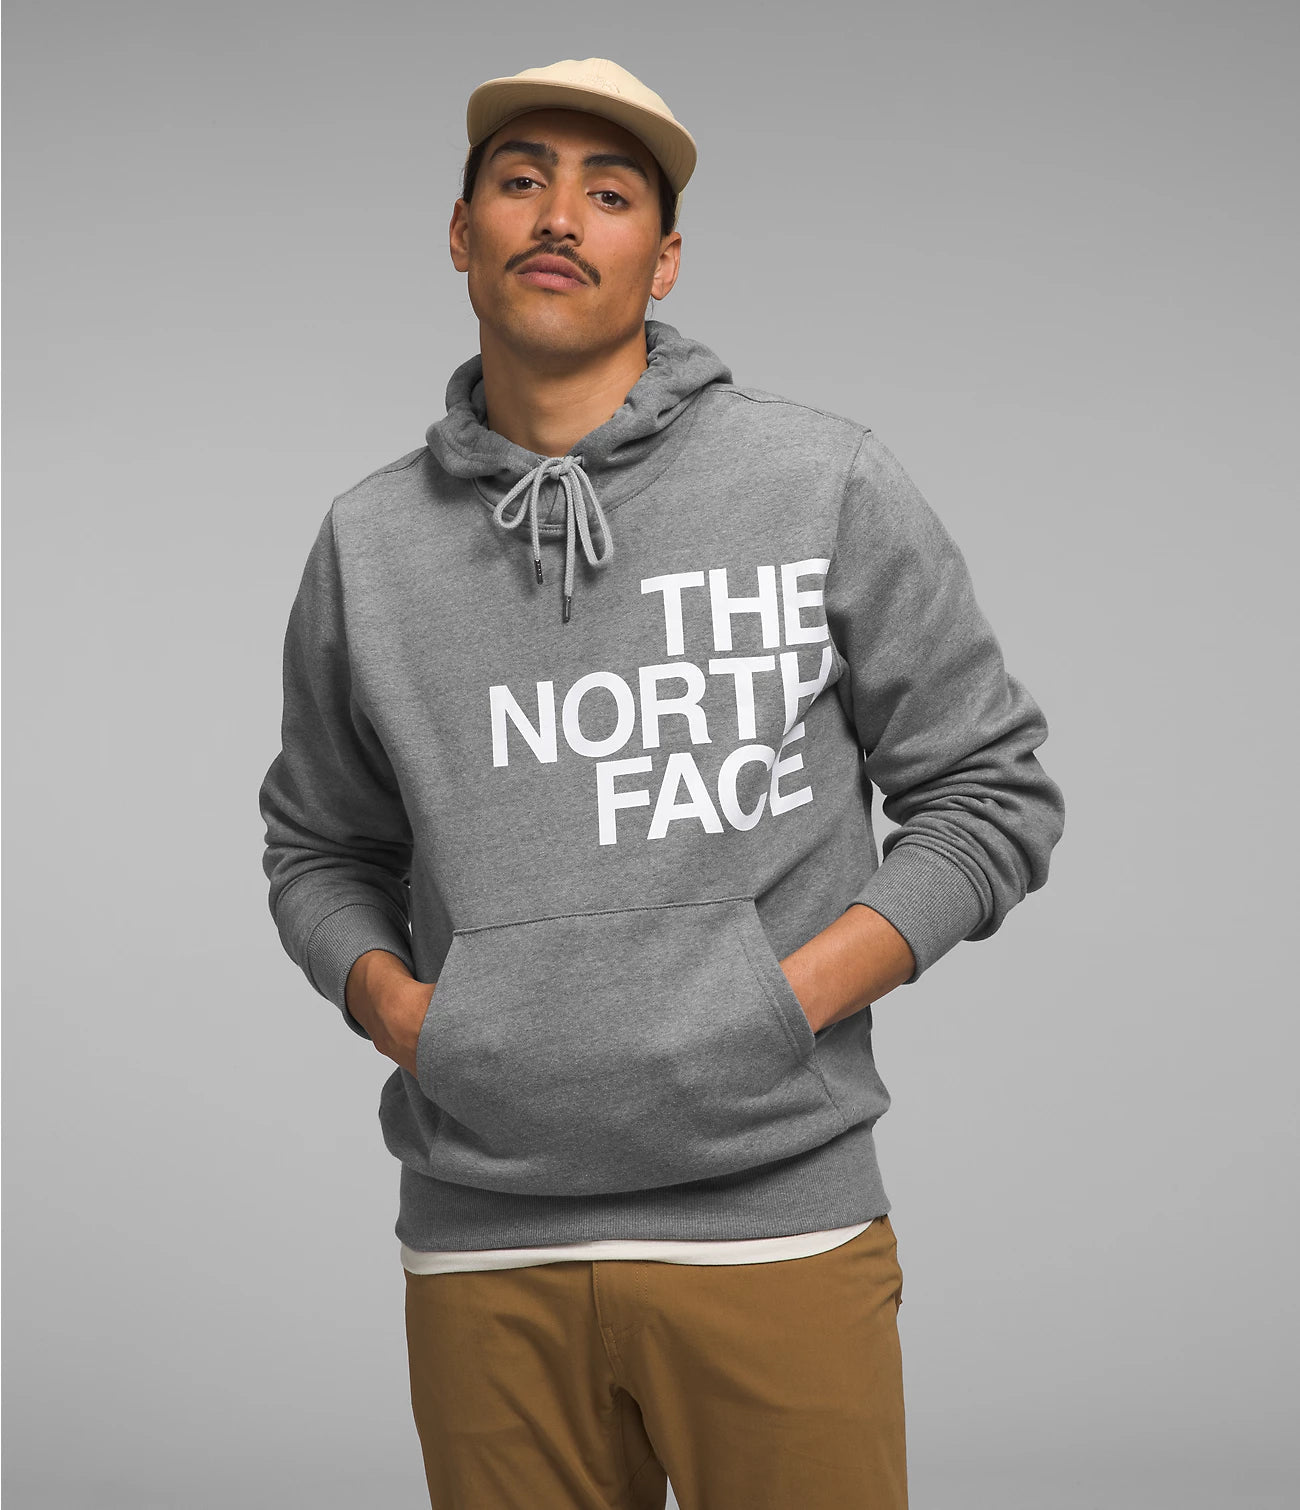 THE NORTH FACE Men's Outerwear North Face Men’s Brand Proud Hoodie || David's Clothing